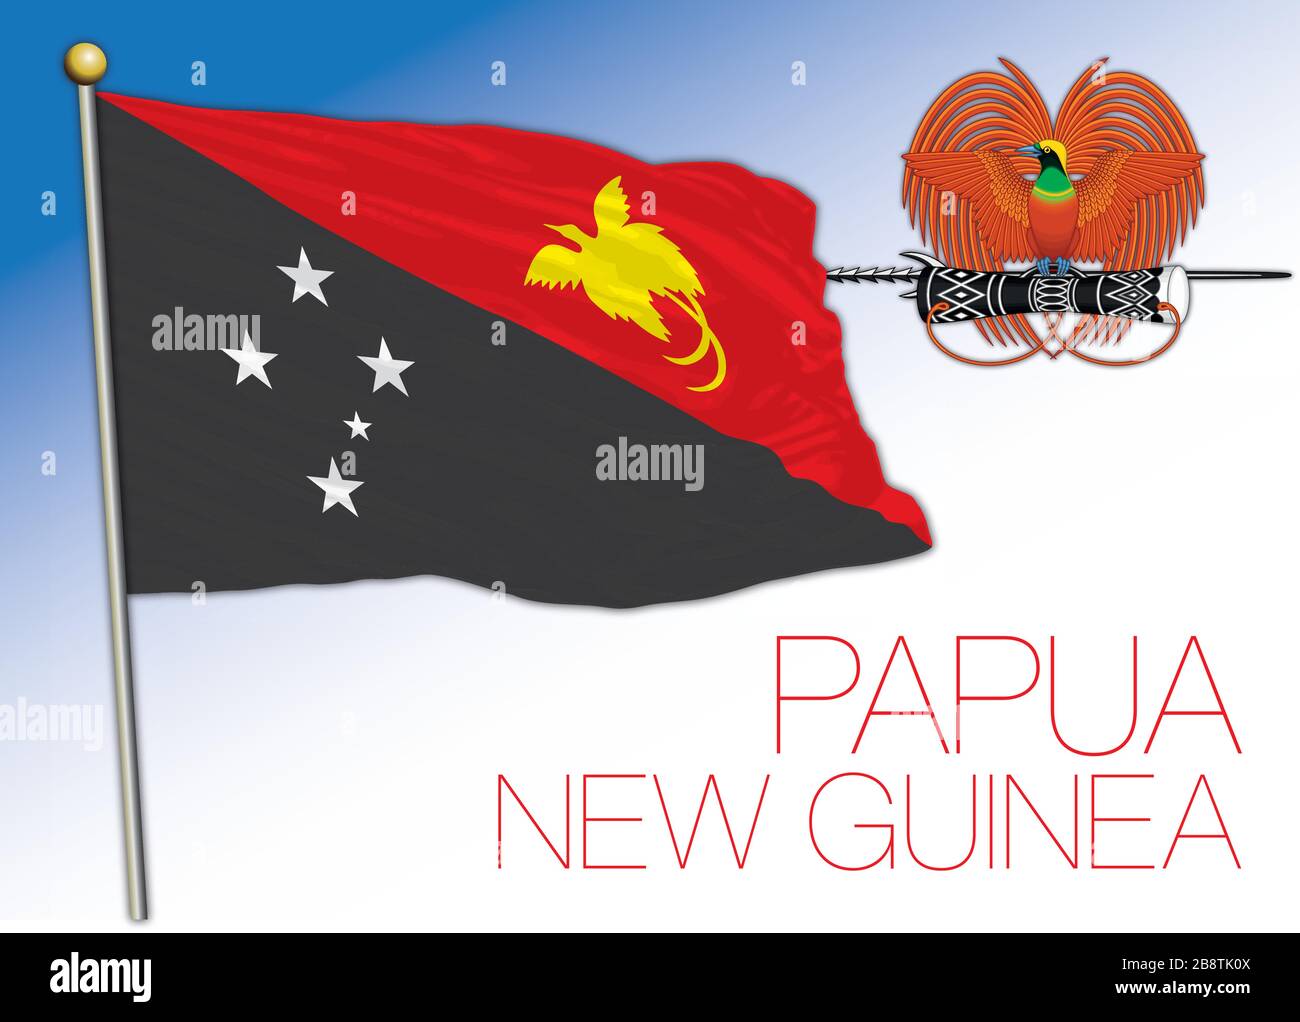 Papua New Guinea ogfficial national flag and coat of arms, australasian country, vector illustration Stock Vector